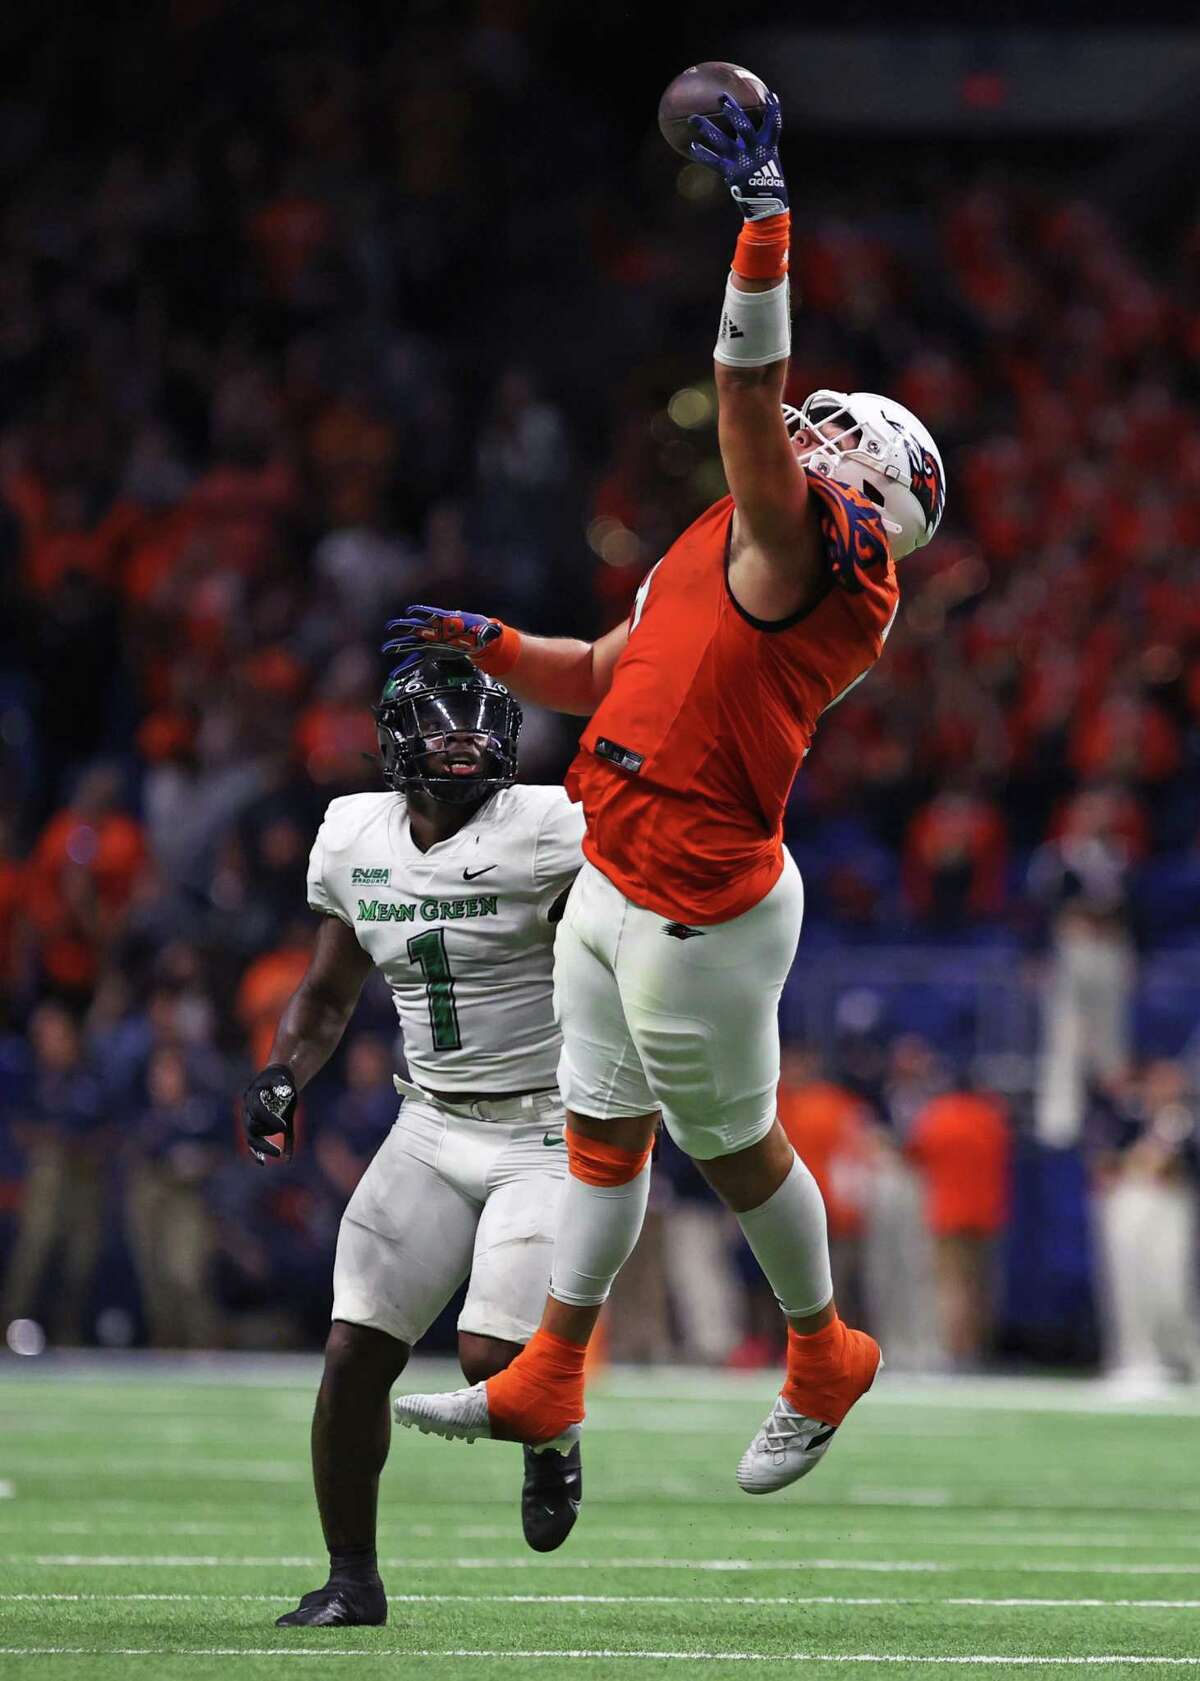 UTSA tight end Oscar Cardenas (9) makes a one handed catch during the NCAA Conference USA football game against North Texas Saturday, Oct. 22, 2022, at the Alamodome in San Antonio, Texas.